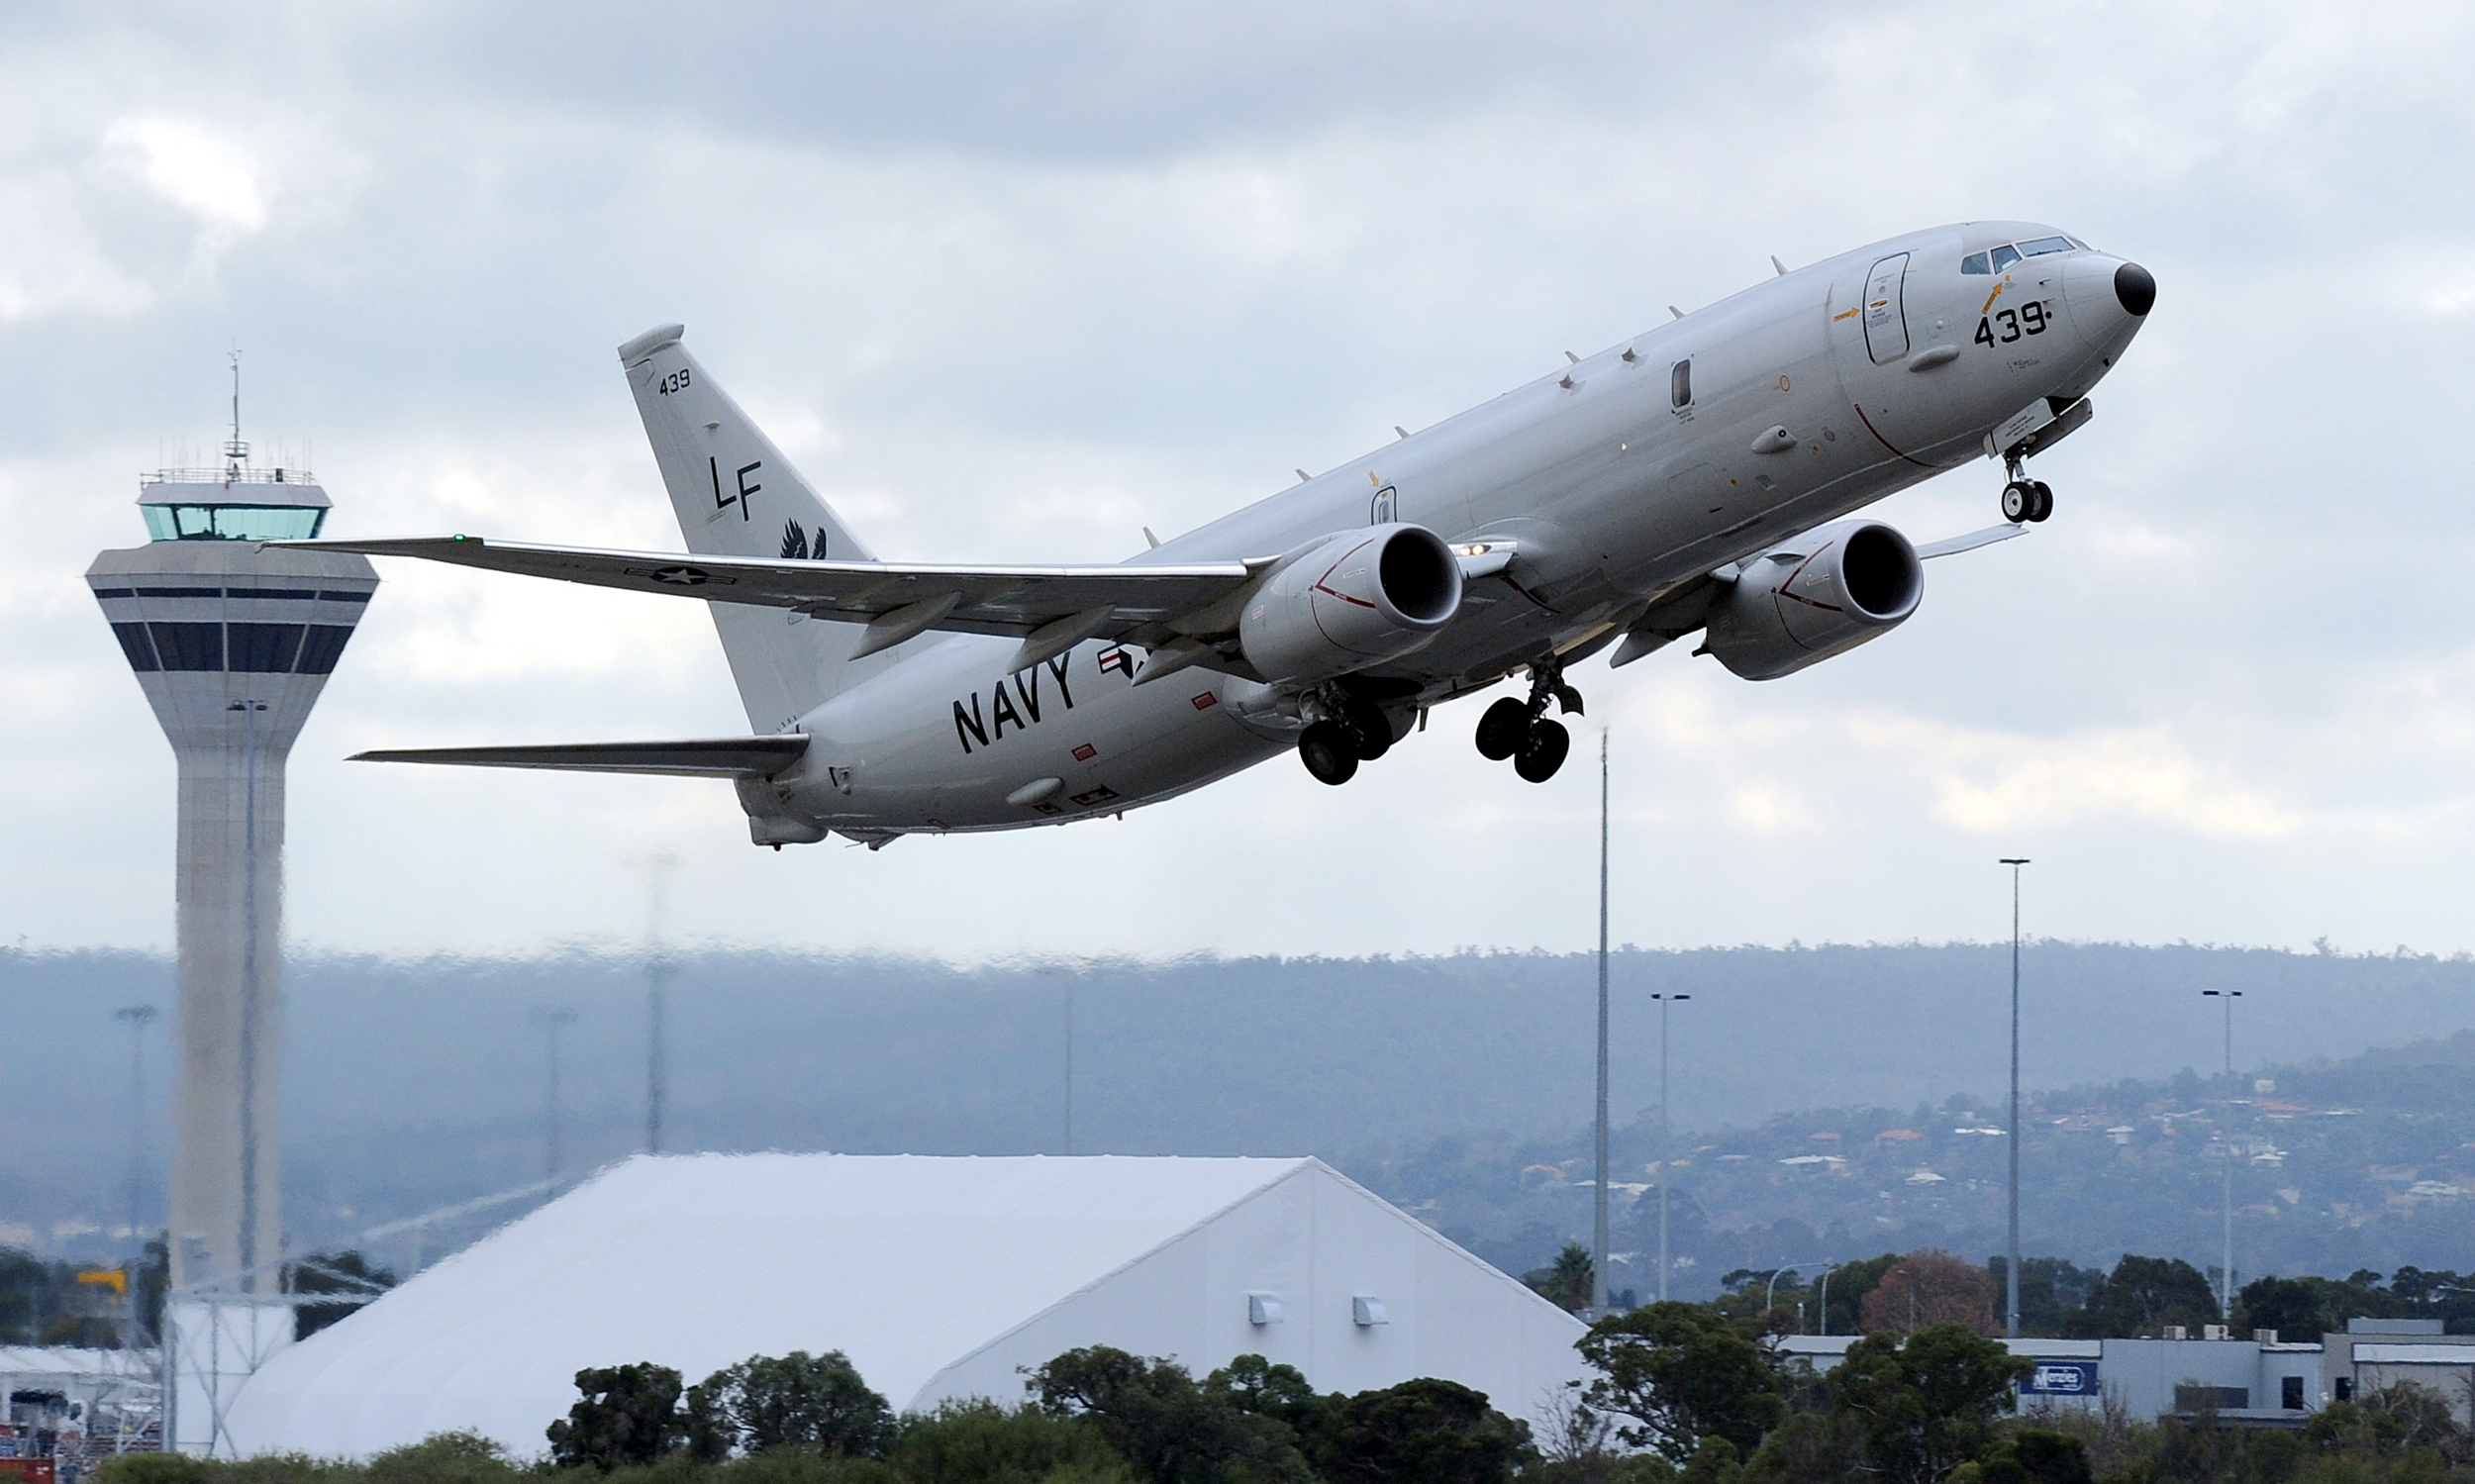 A U.S. Navy P-8 Poseidon aircraft takes off from Perth International Airport to participate in the search for the missing Malaysian Airlines flight MH370